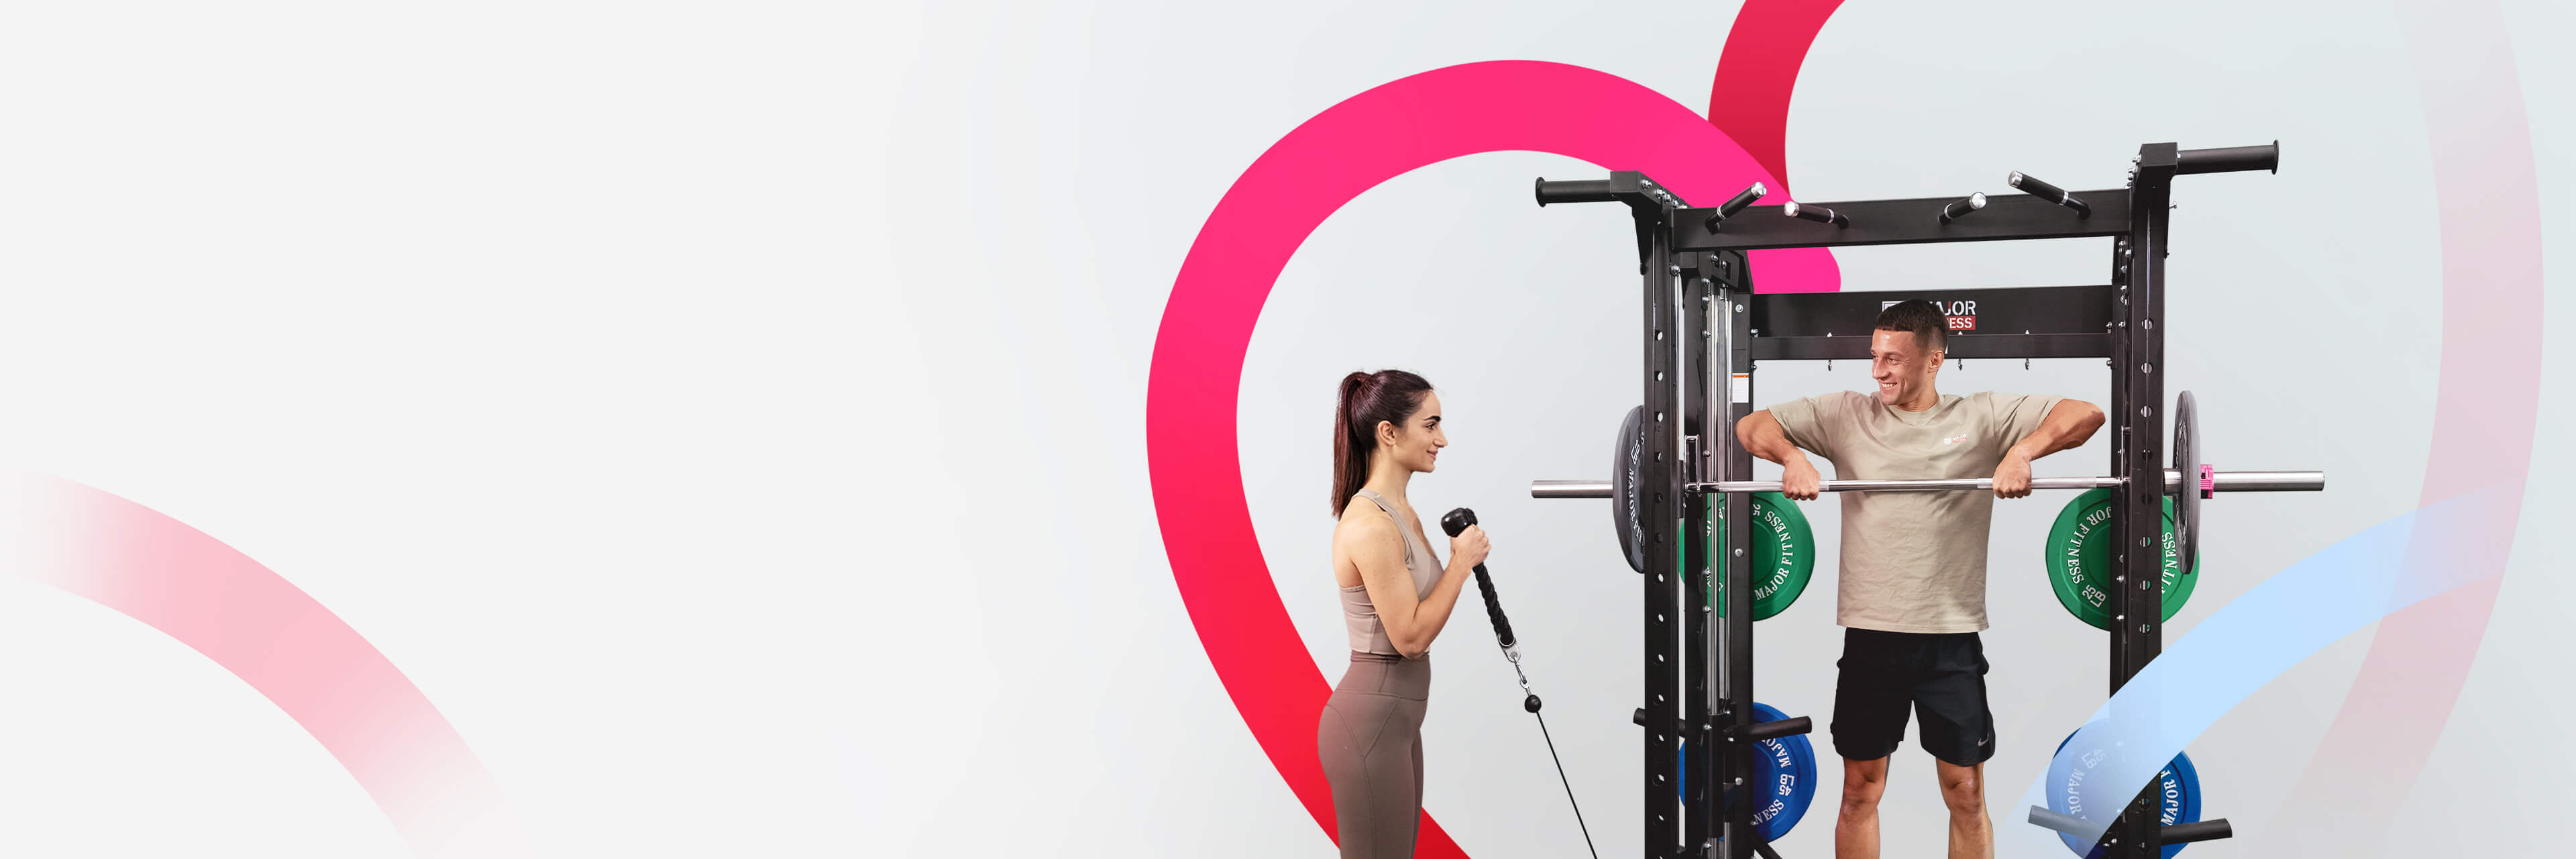 Major Fitness Valentine's Day Deal